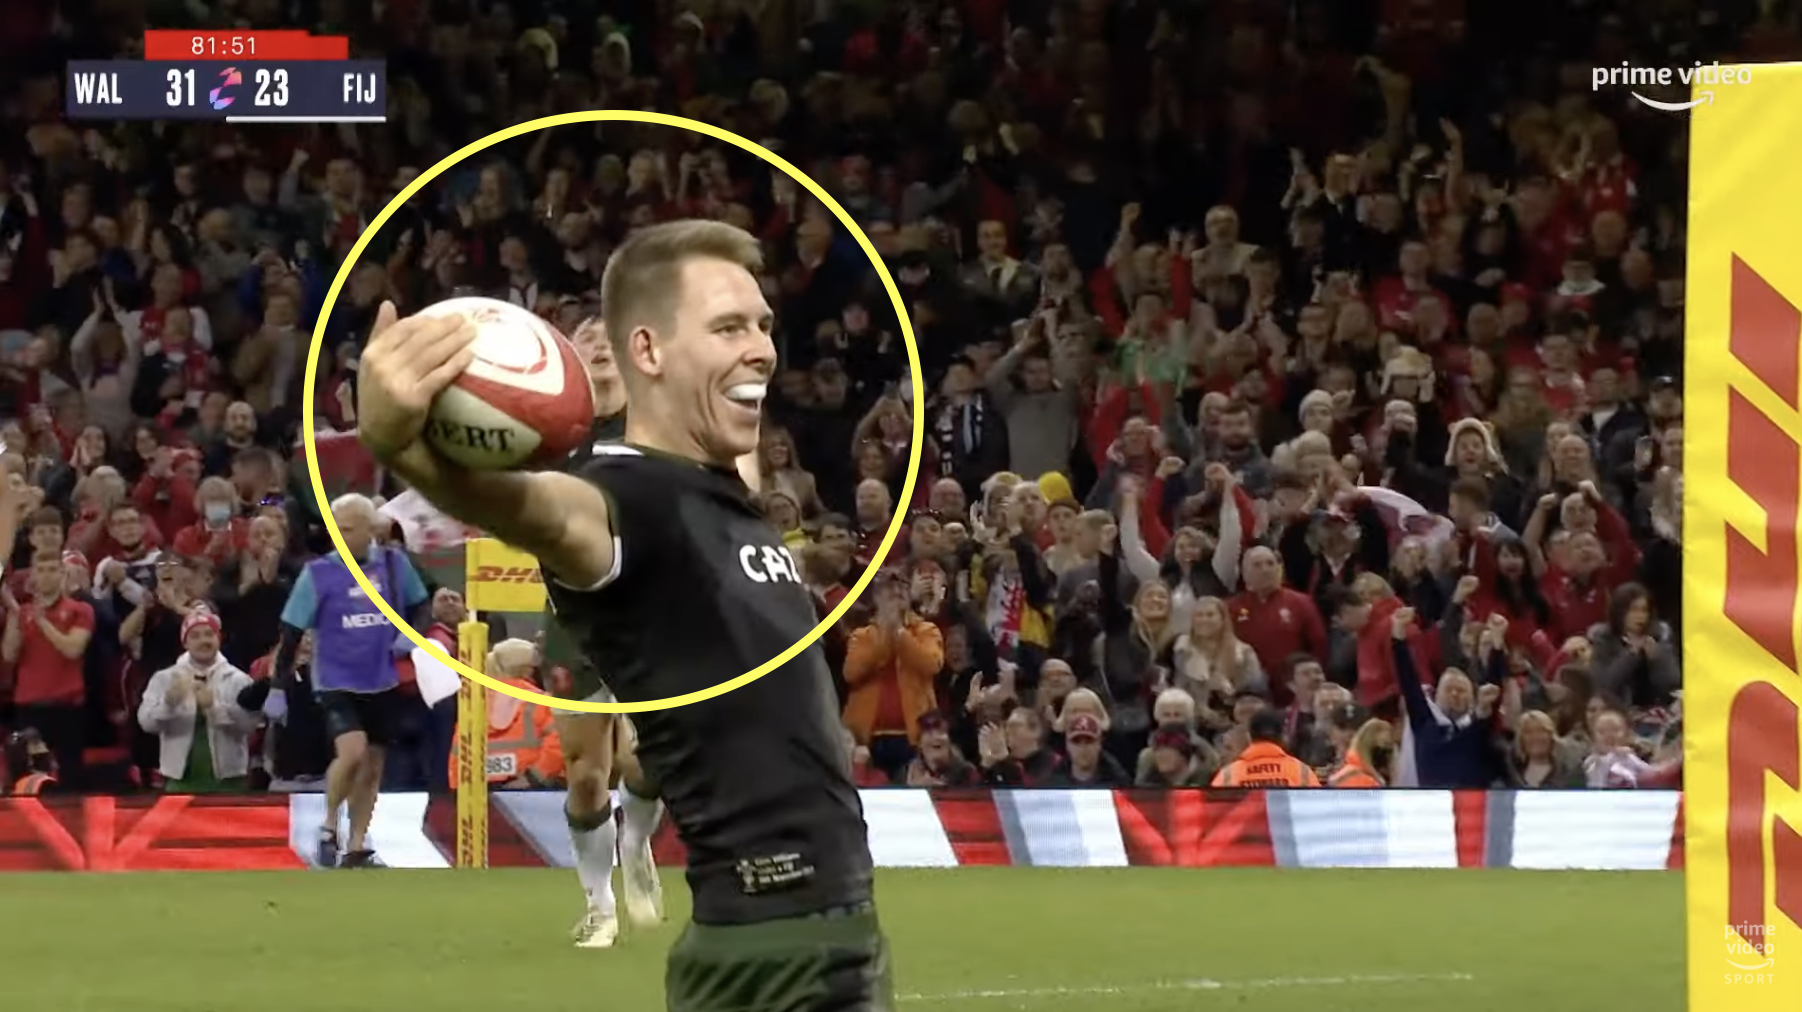 Liam Williams' insane piece of skill is picked up online after going unnoticed